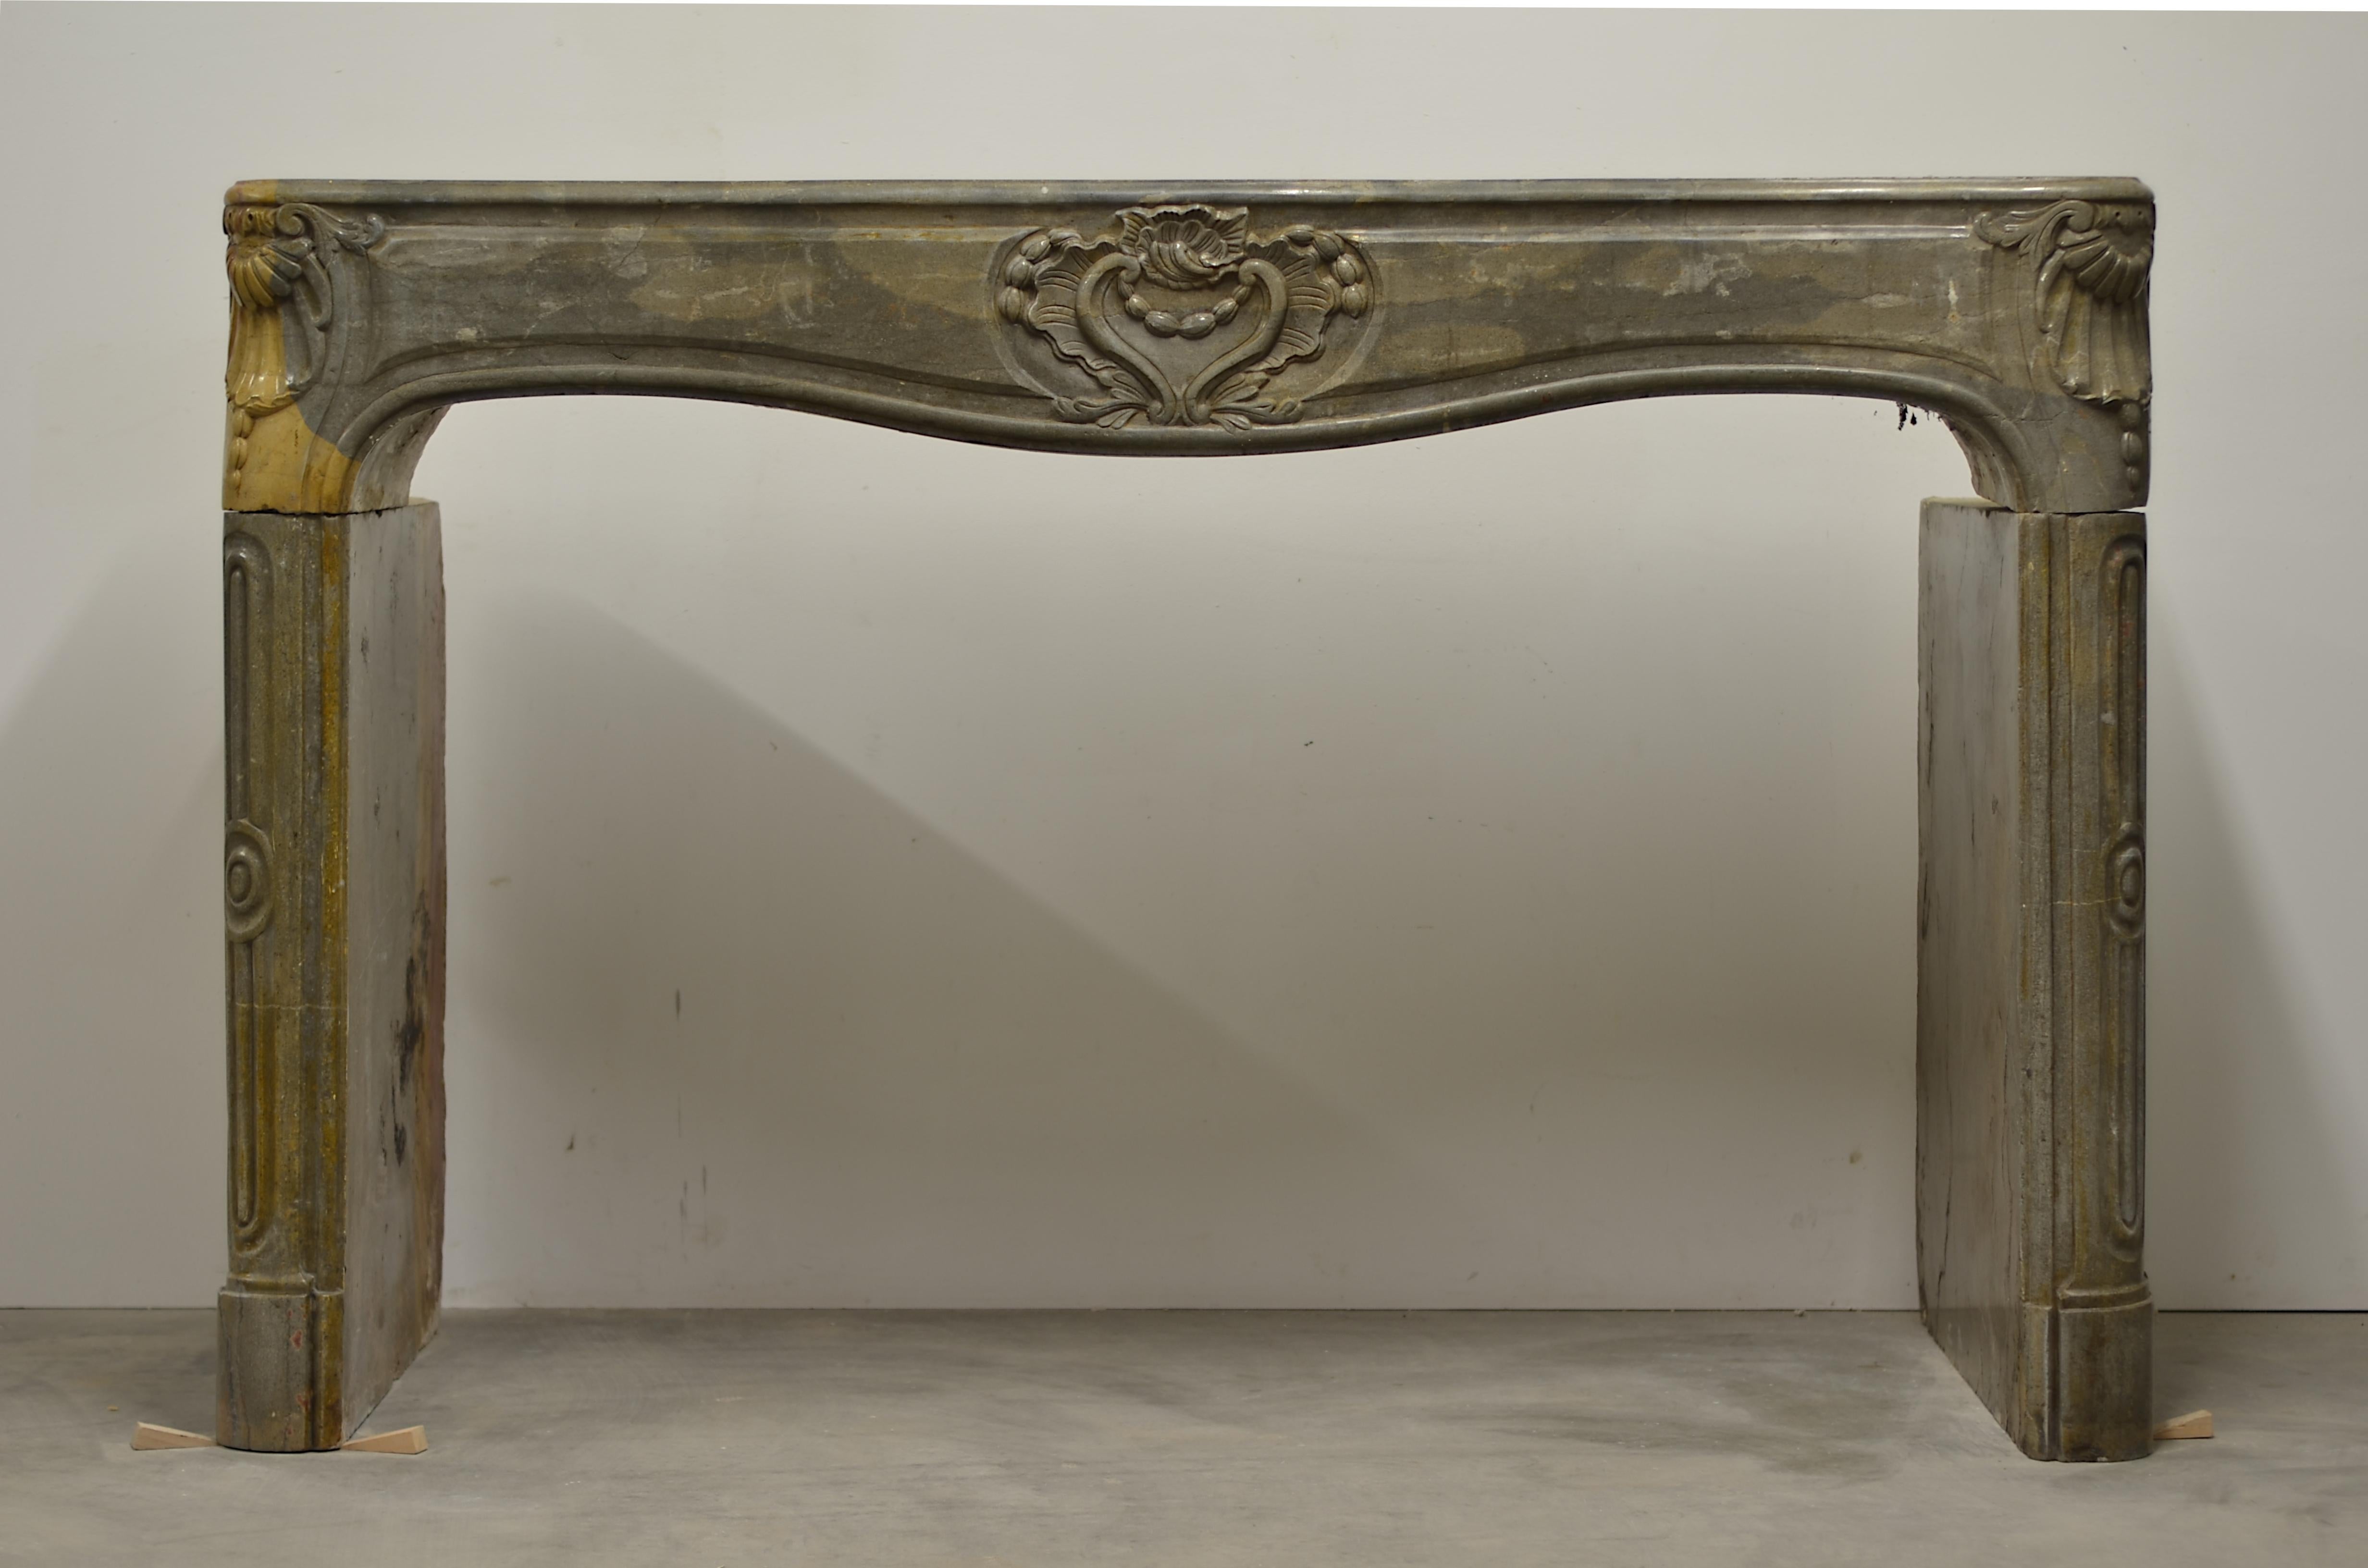 Very nice and strong French Louis XV fireplace mantel in limestone.
The amazingly detailed carvings are beautifully executed, the strong lines of the mantels gives it a nice stance.

Comes from the same mansion as LU1002521897602, would mae a